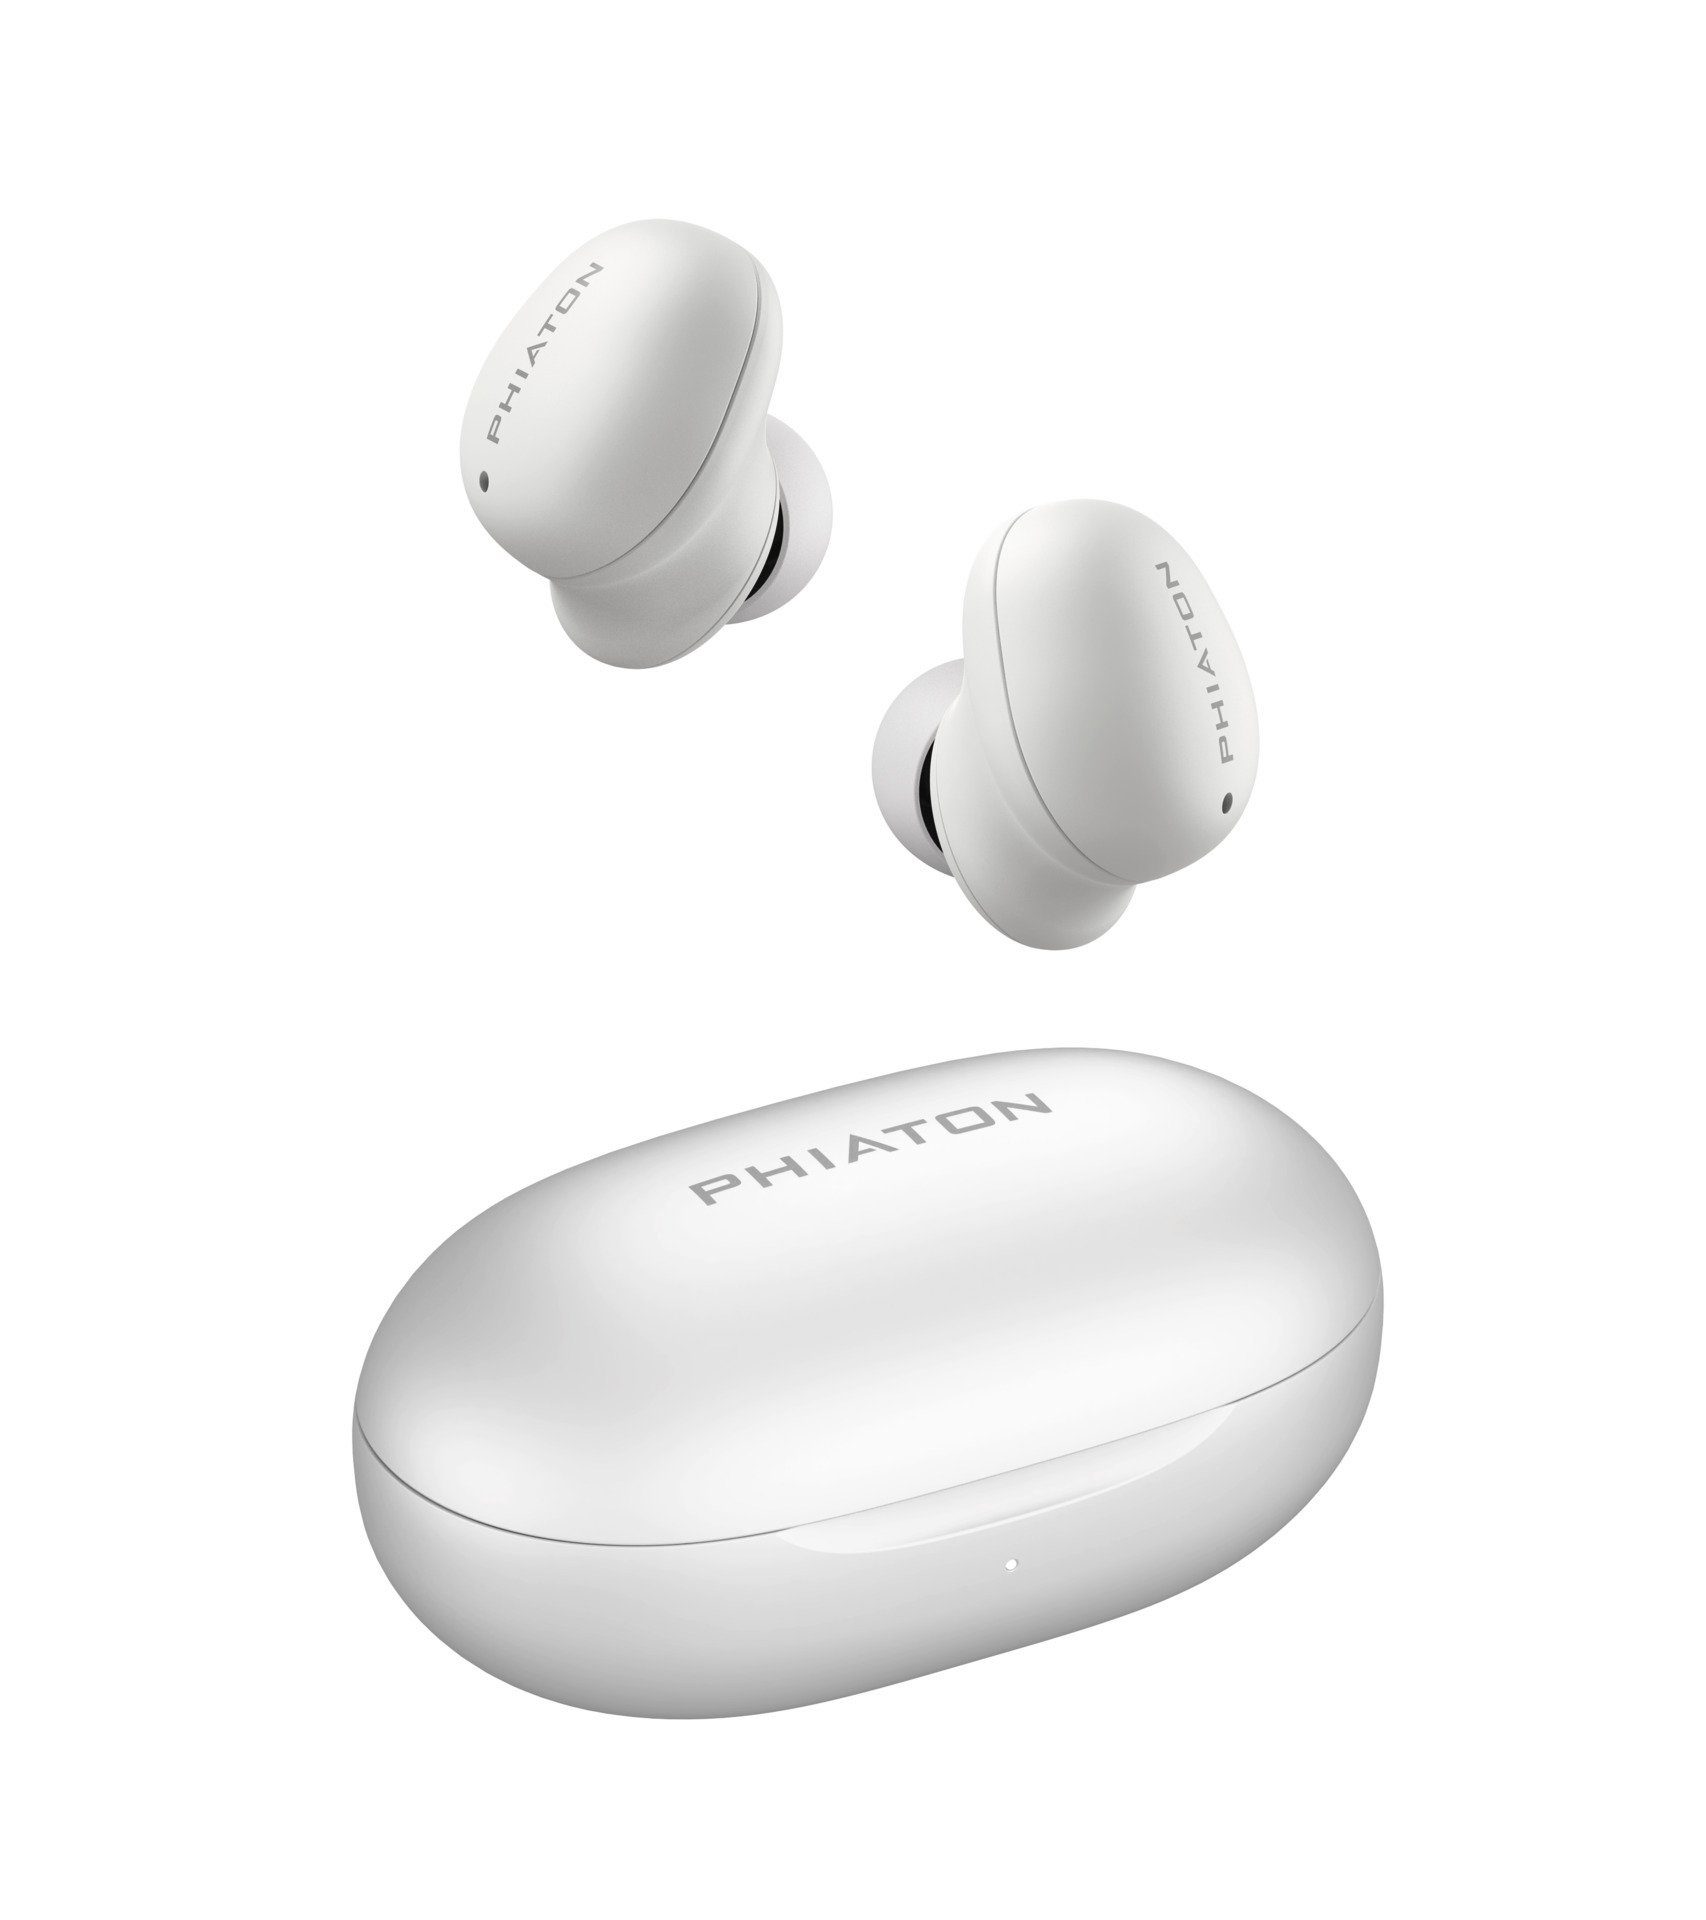 Samsung Phiaton BonoBuds wireless Навушники-вкладиші (Active Noise Cancelling (ANC), Freisprechfunktion, True Wireless, A2DP Bluetooth, mit Touch Control, Active Noise Canceling und Ambient Mode)